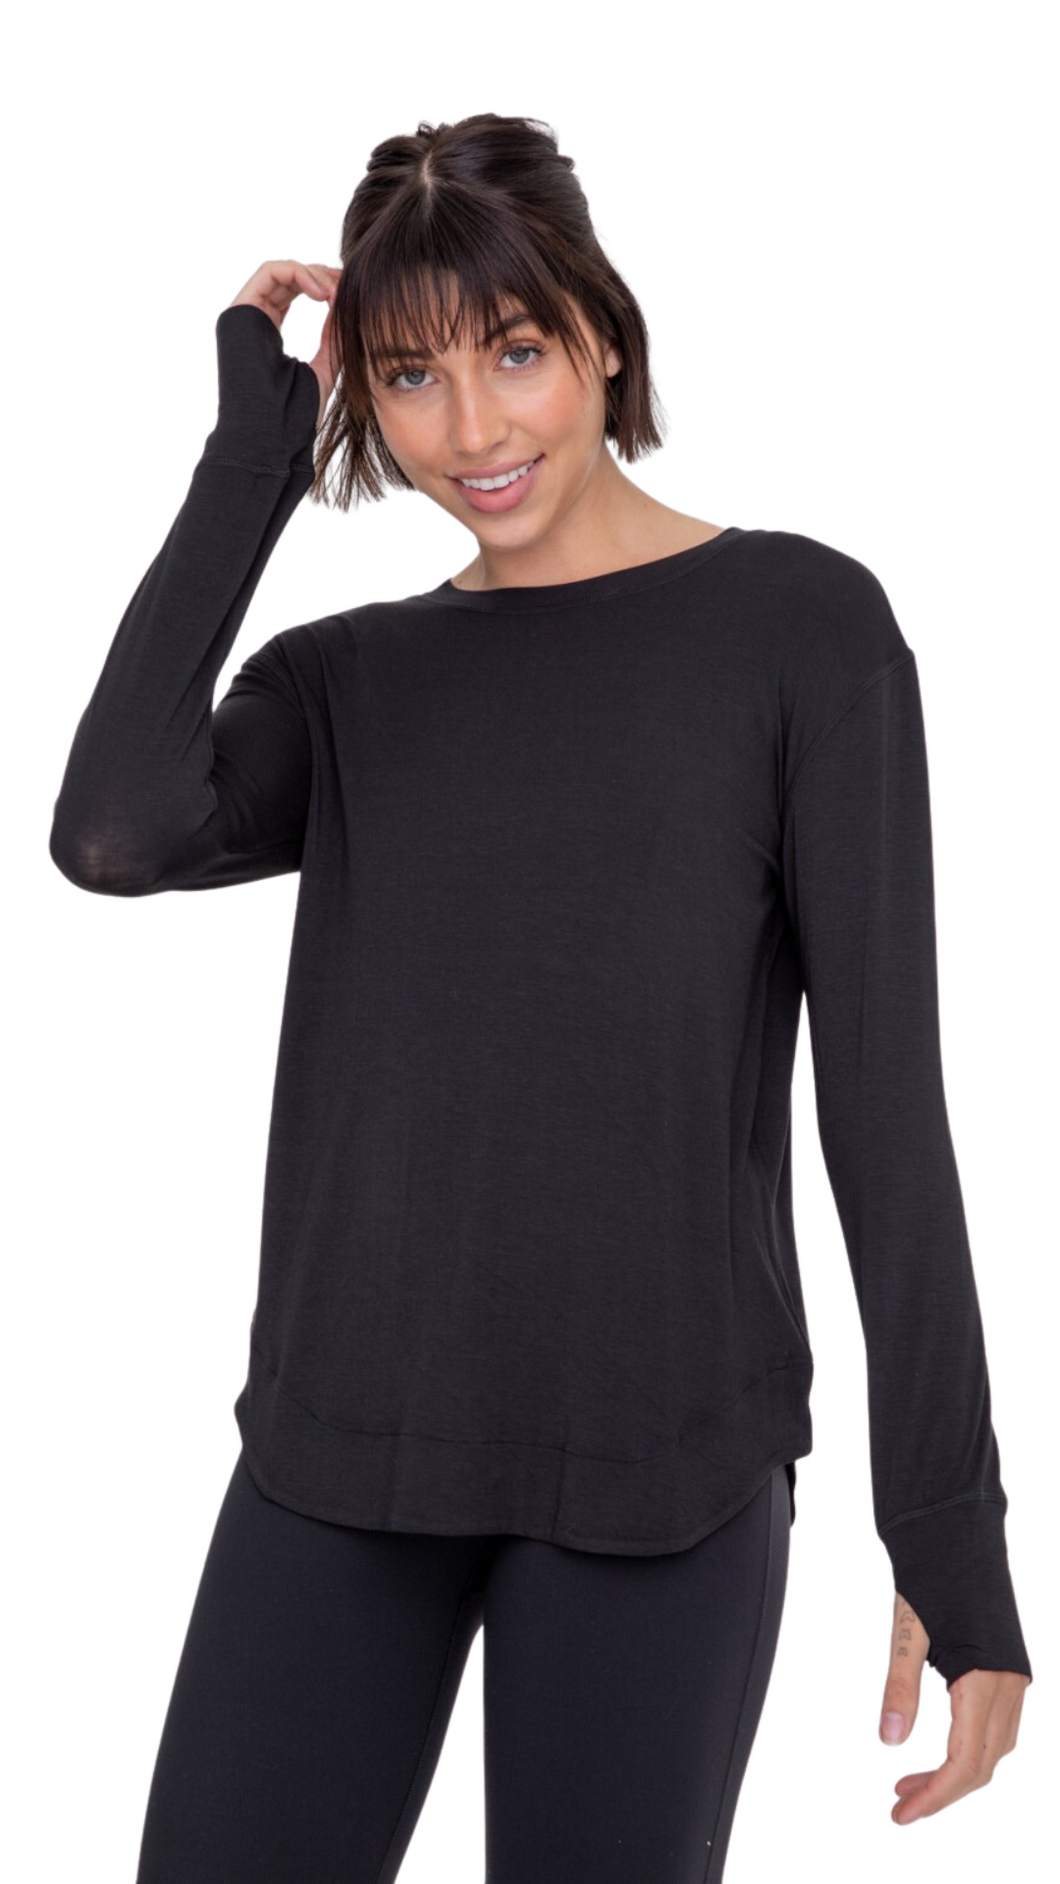 FREE MB SOFT TOUCH LONG SLEEVES TANK TOP BLACK